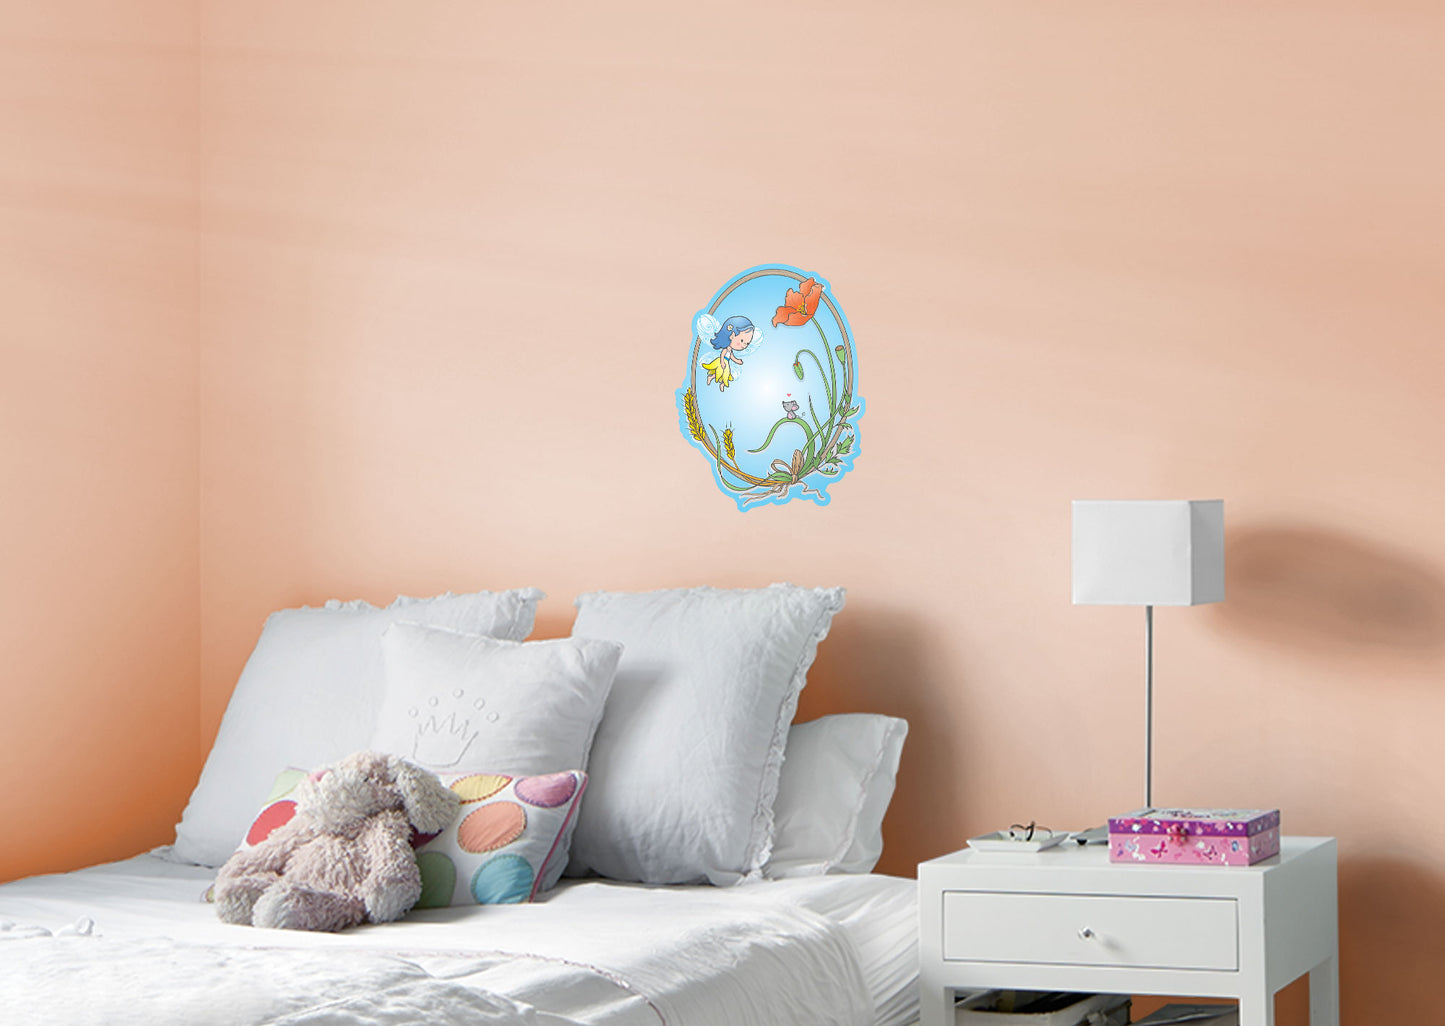 Nursery:  Mouse Icon        -   Removable     Adhesive Decal